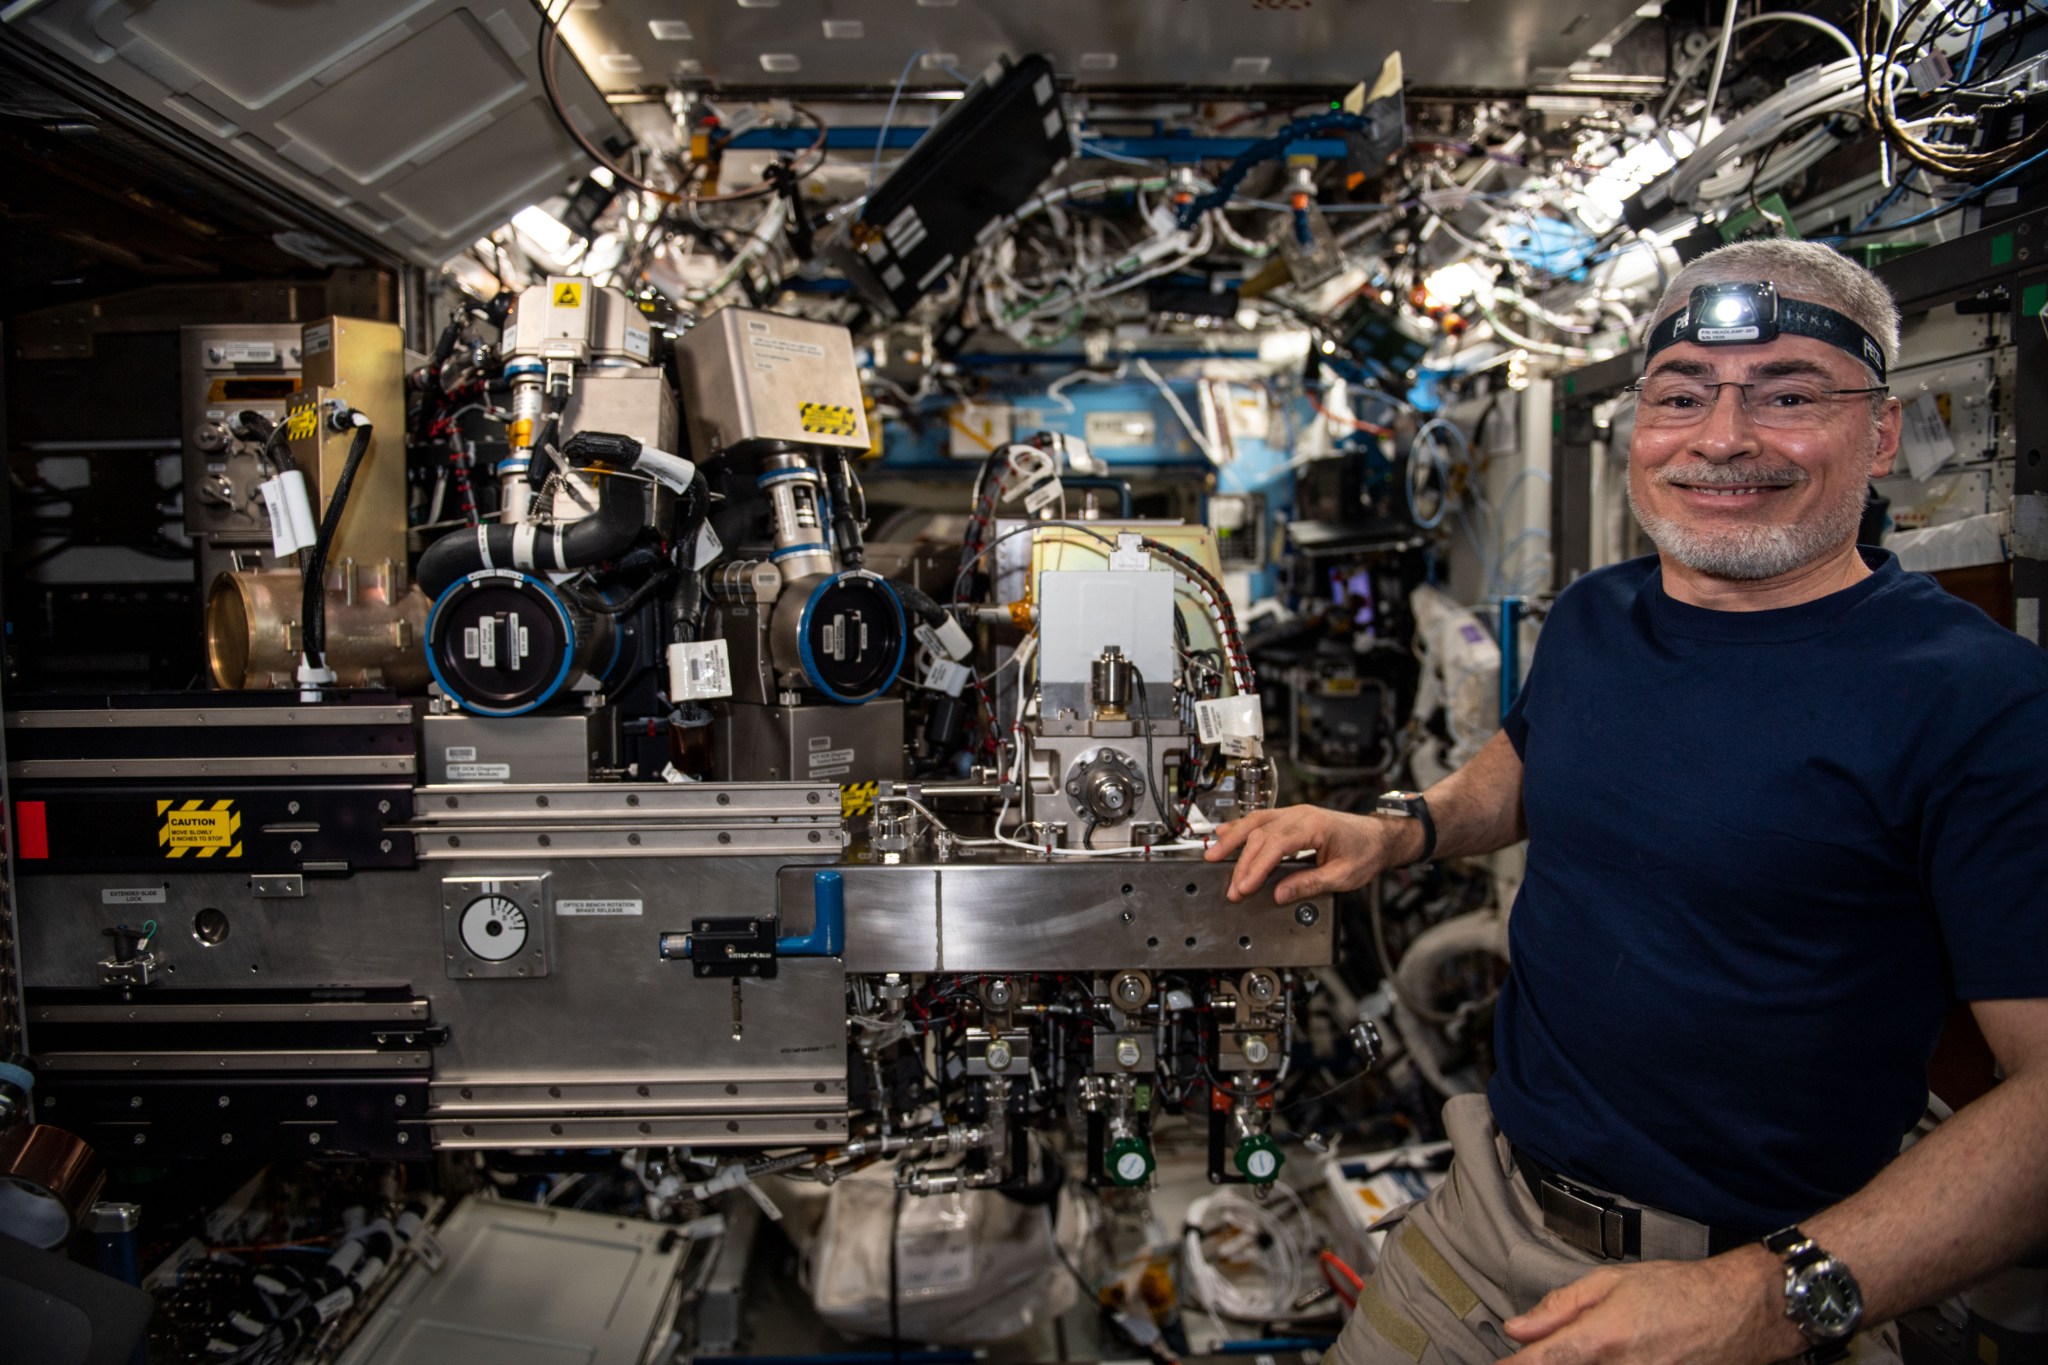 (Feb. 10, 2022) u002du002d- NASA astronaut and Expedition 66 Flight Engineer Mark Vande Hei configures the Combustion Integrated Rack in the U.S. Destiny laboratory module to support a pair of fire safety experiments.